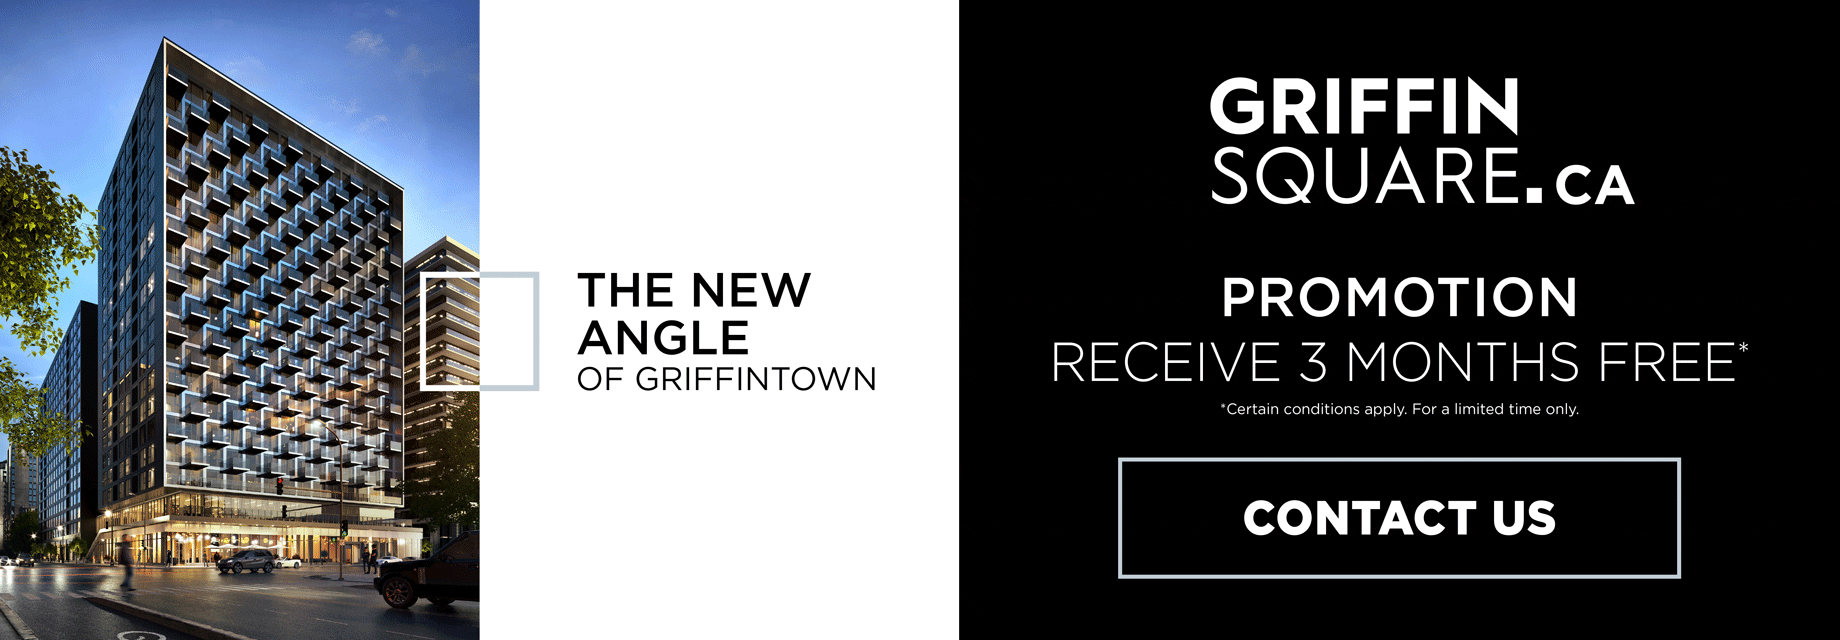 Griffin Square promotion receive three month free.